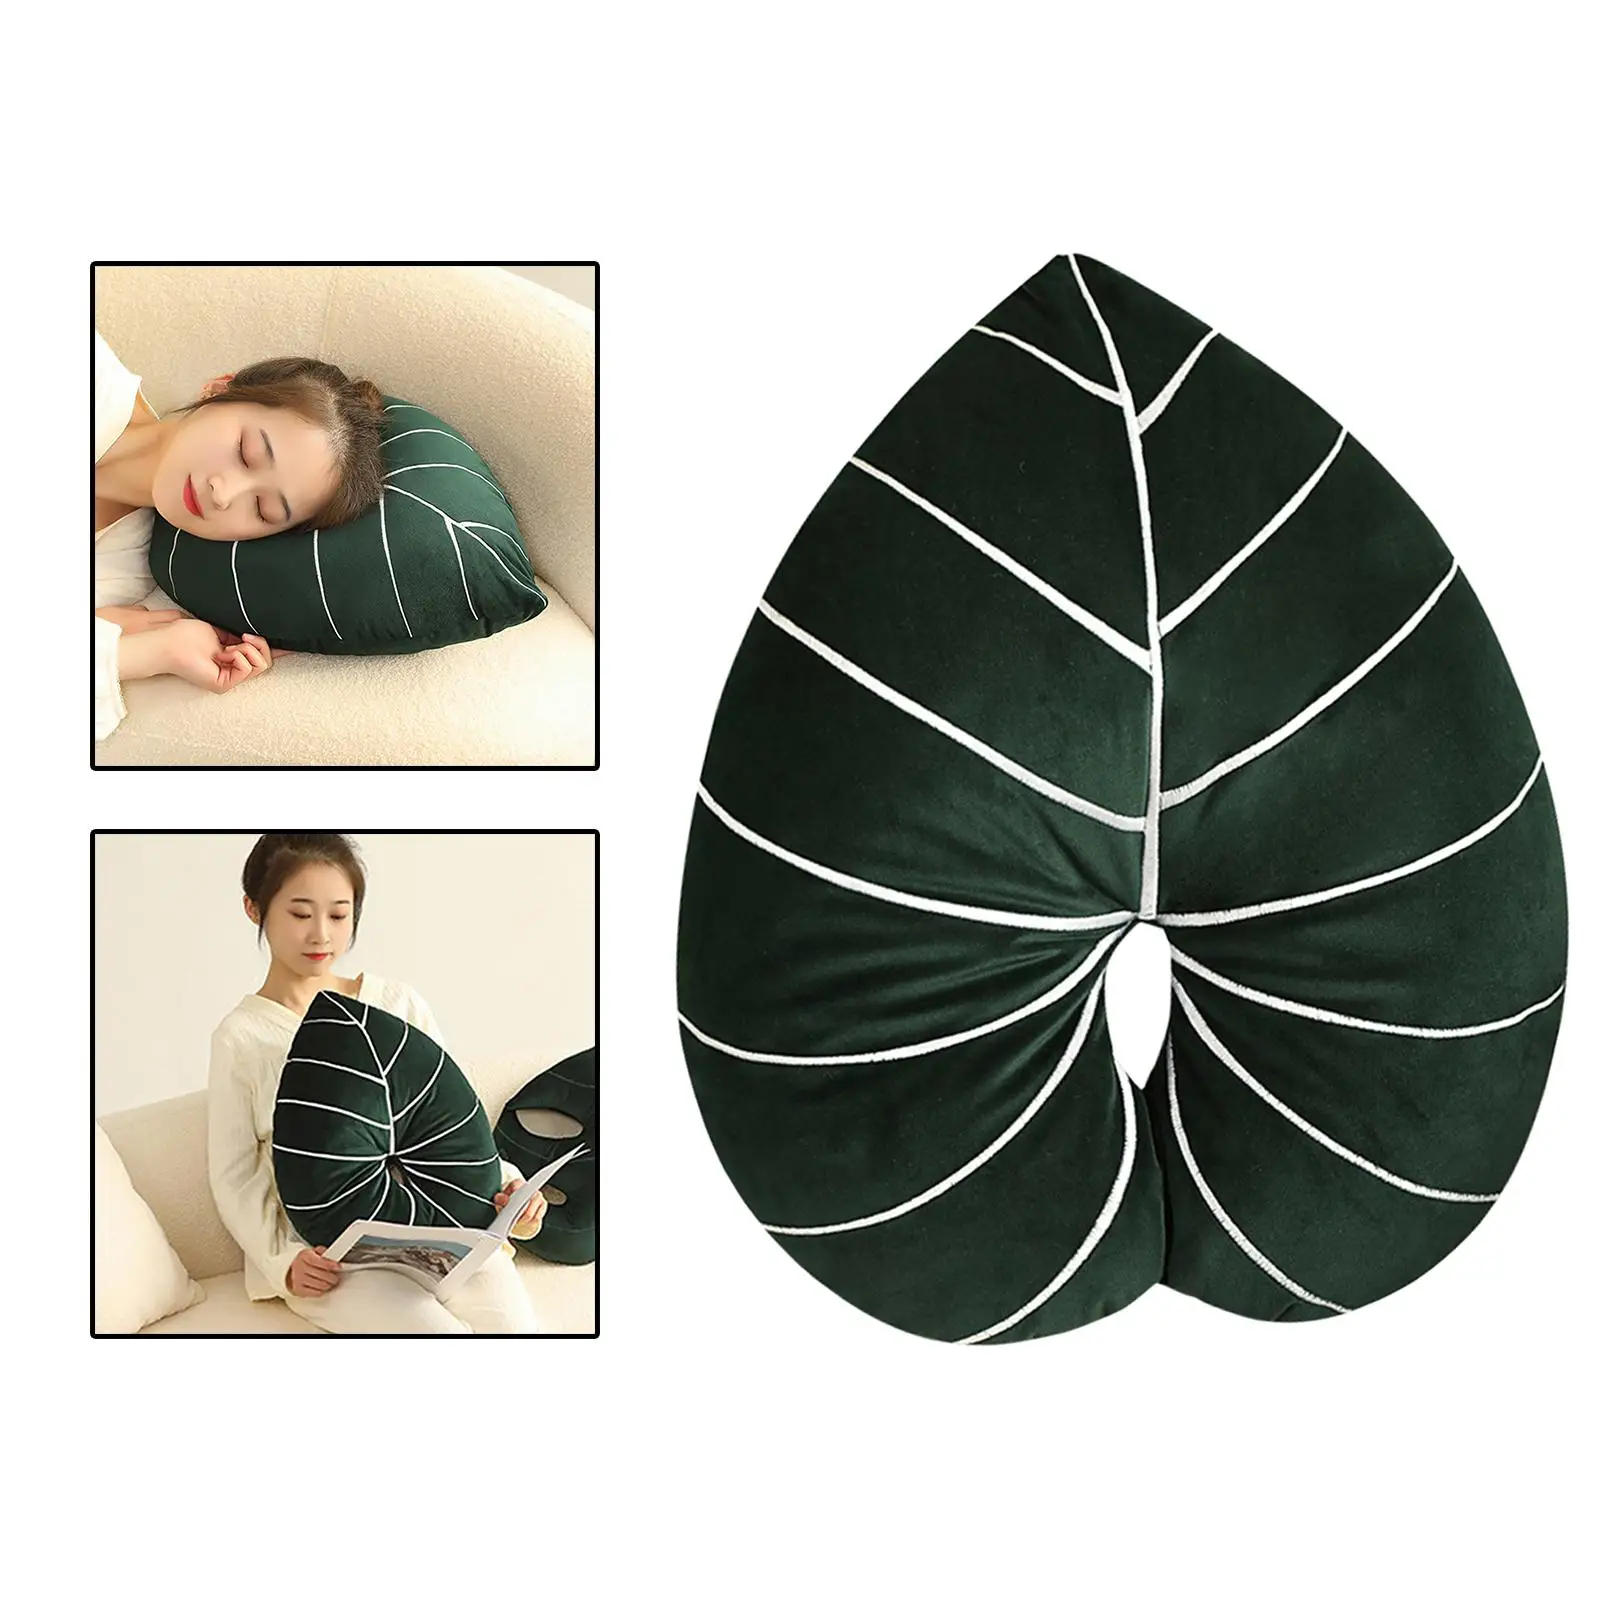  Leaf Shaped Throw  Filled Plant Leaves Plush Decorative Cushion  for Sofa Couch Car Bed Home Decor